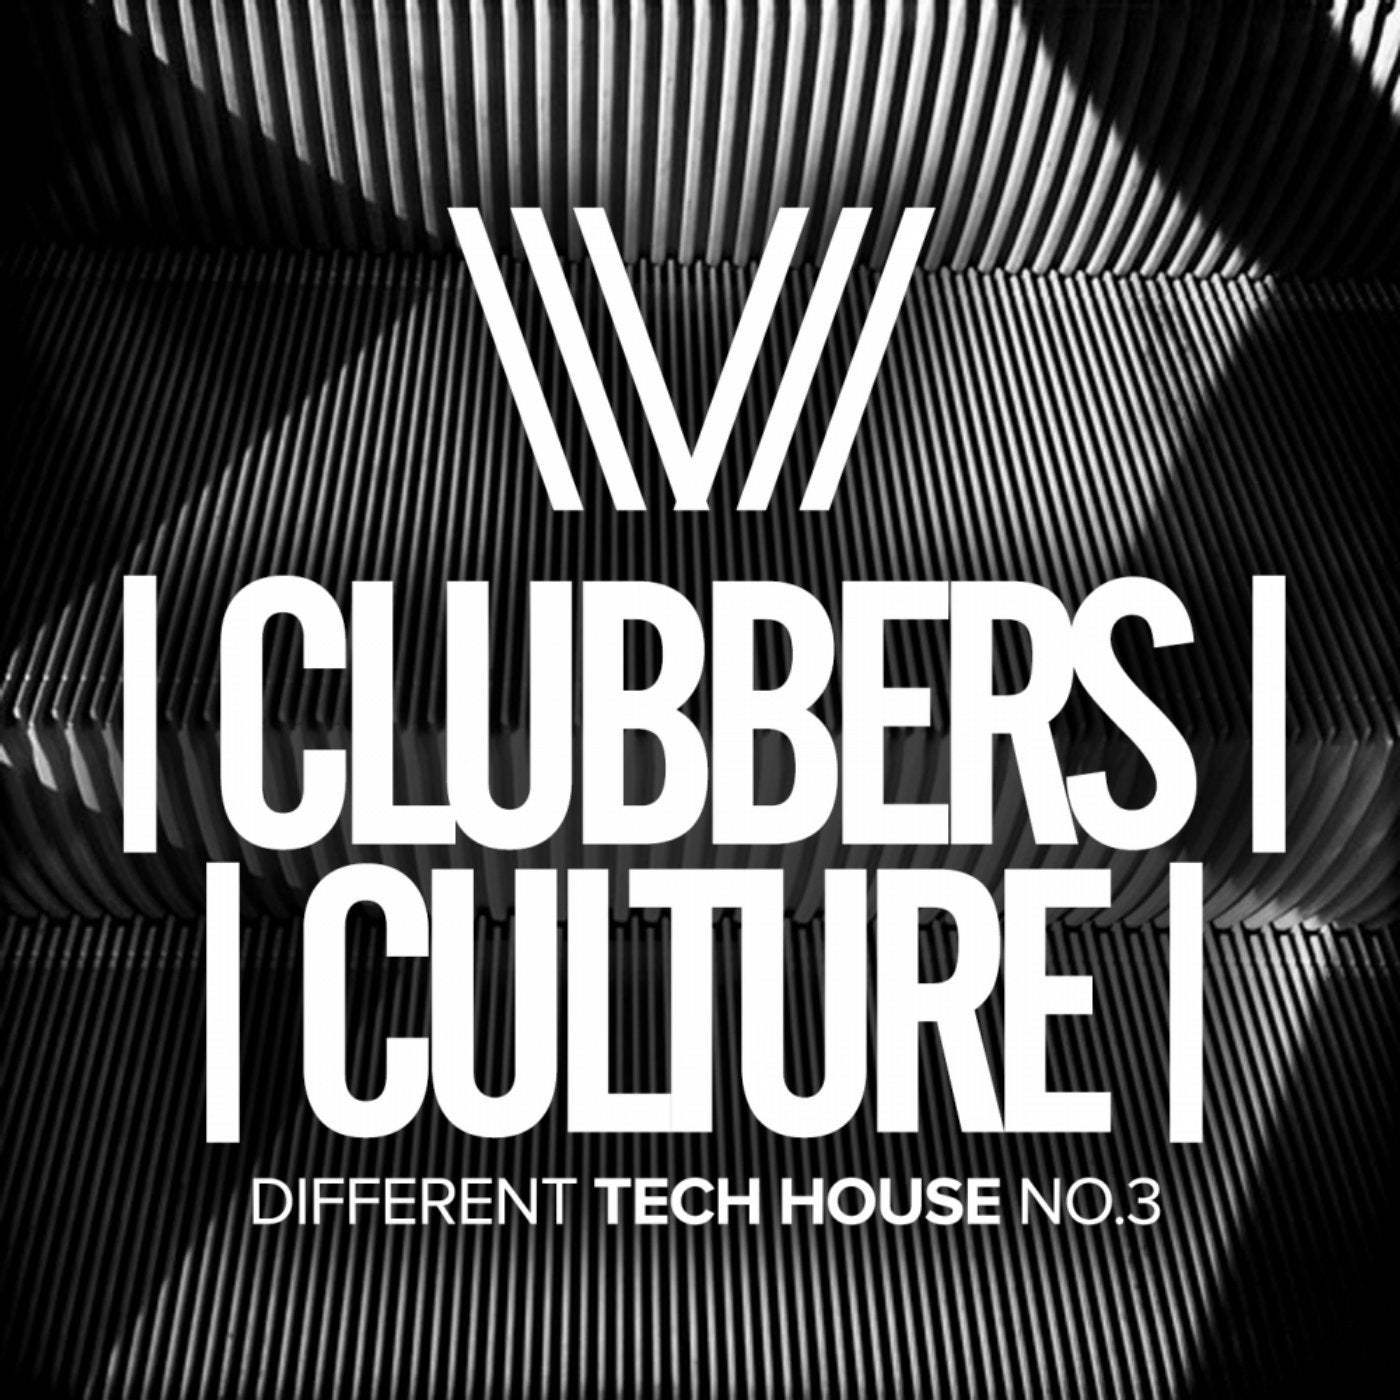 Clubbers Culture: Different Tech House No.3